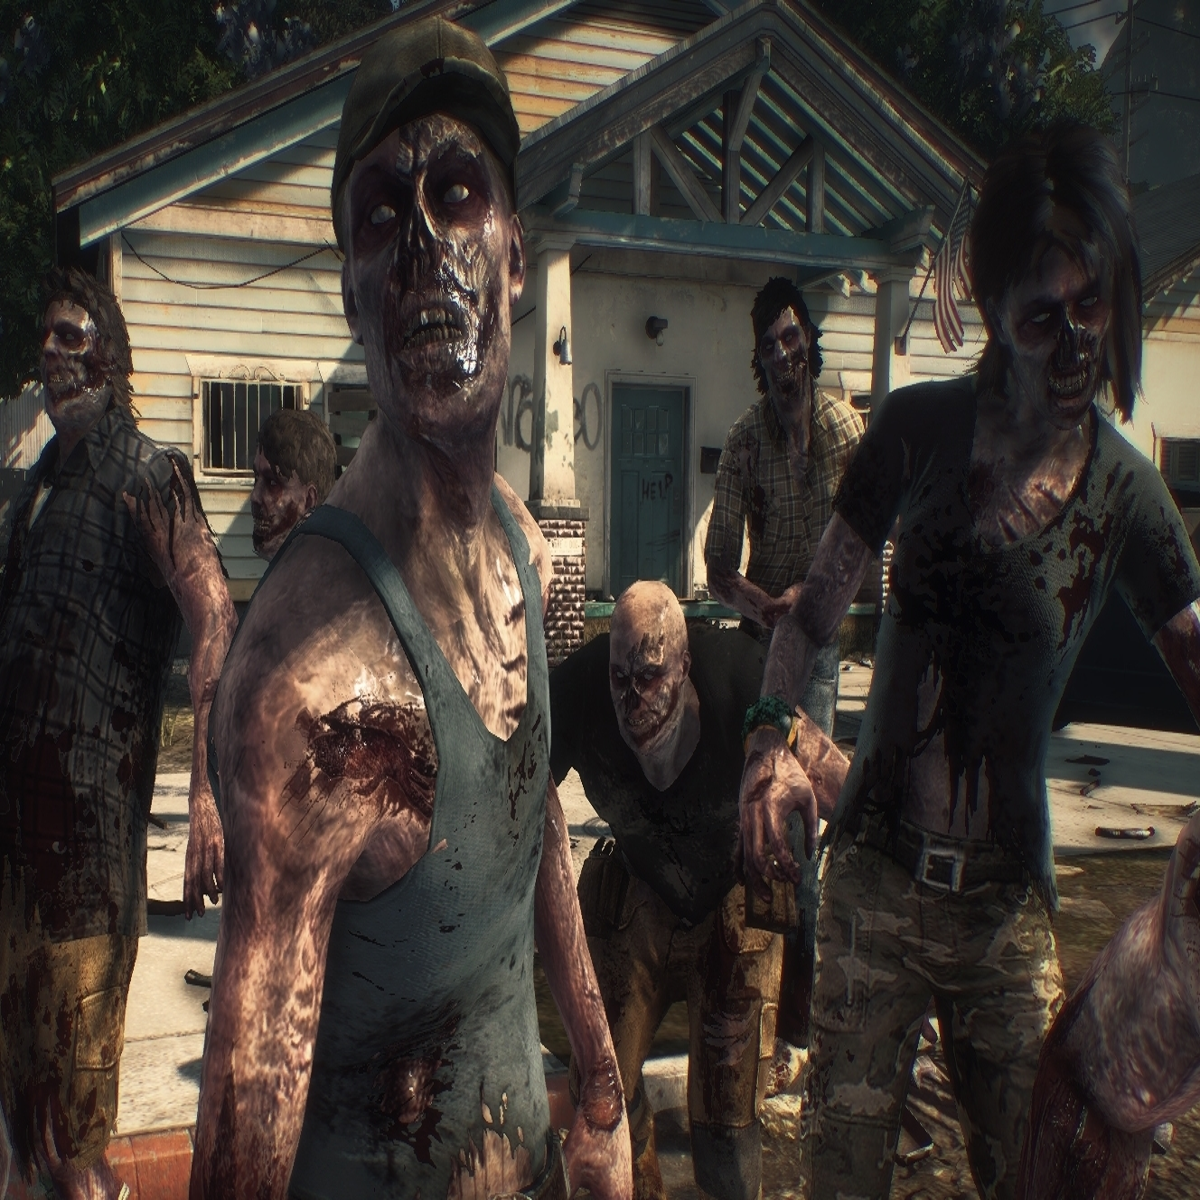 Dead Rising Triple Pack' brings zombie carnage to PS4 owners